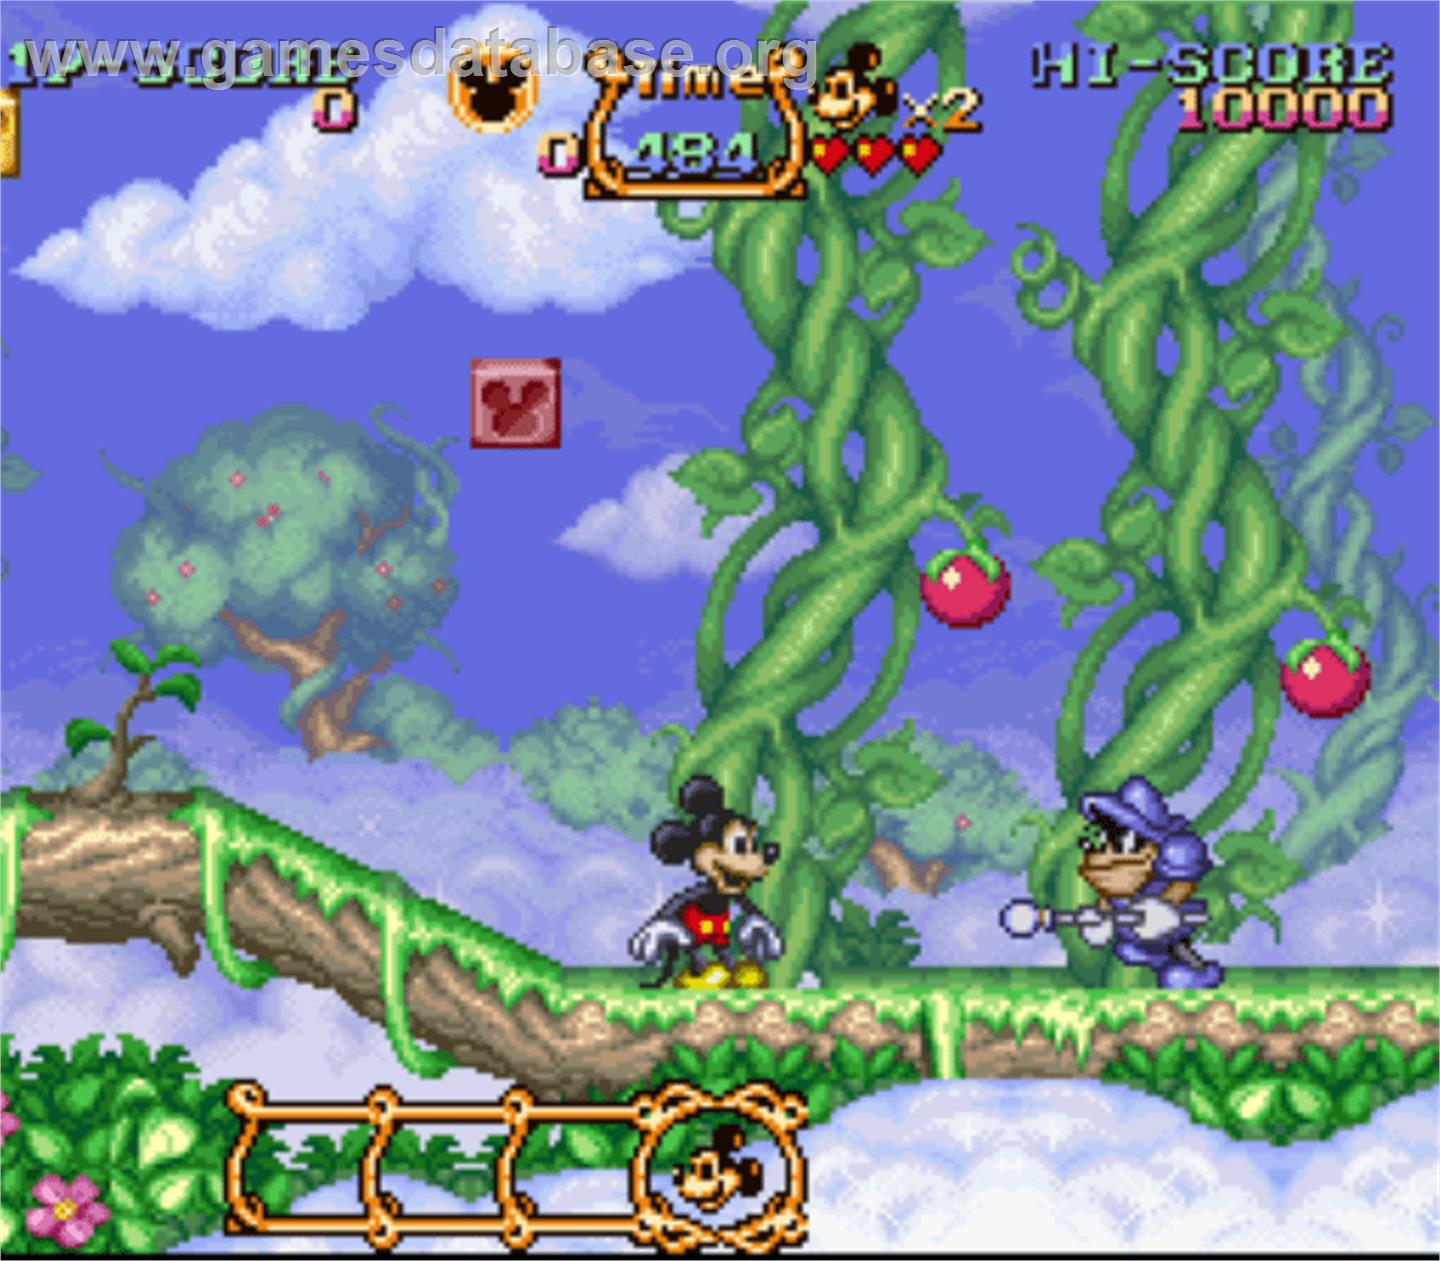 Disney's Magical Quest Starring Mickey Mouse - Nintendo SNES - Artwork - In Game